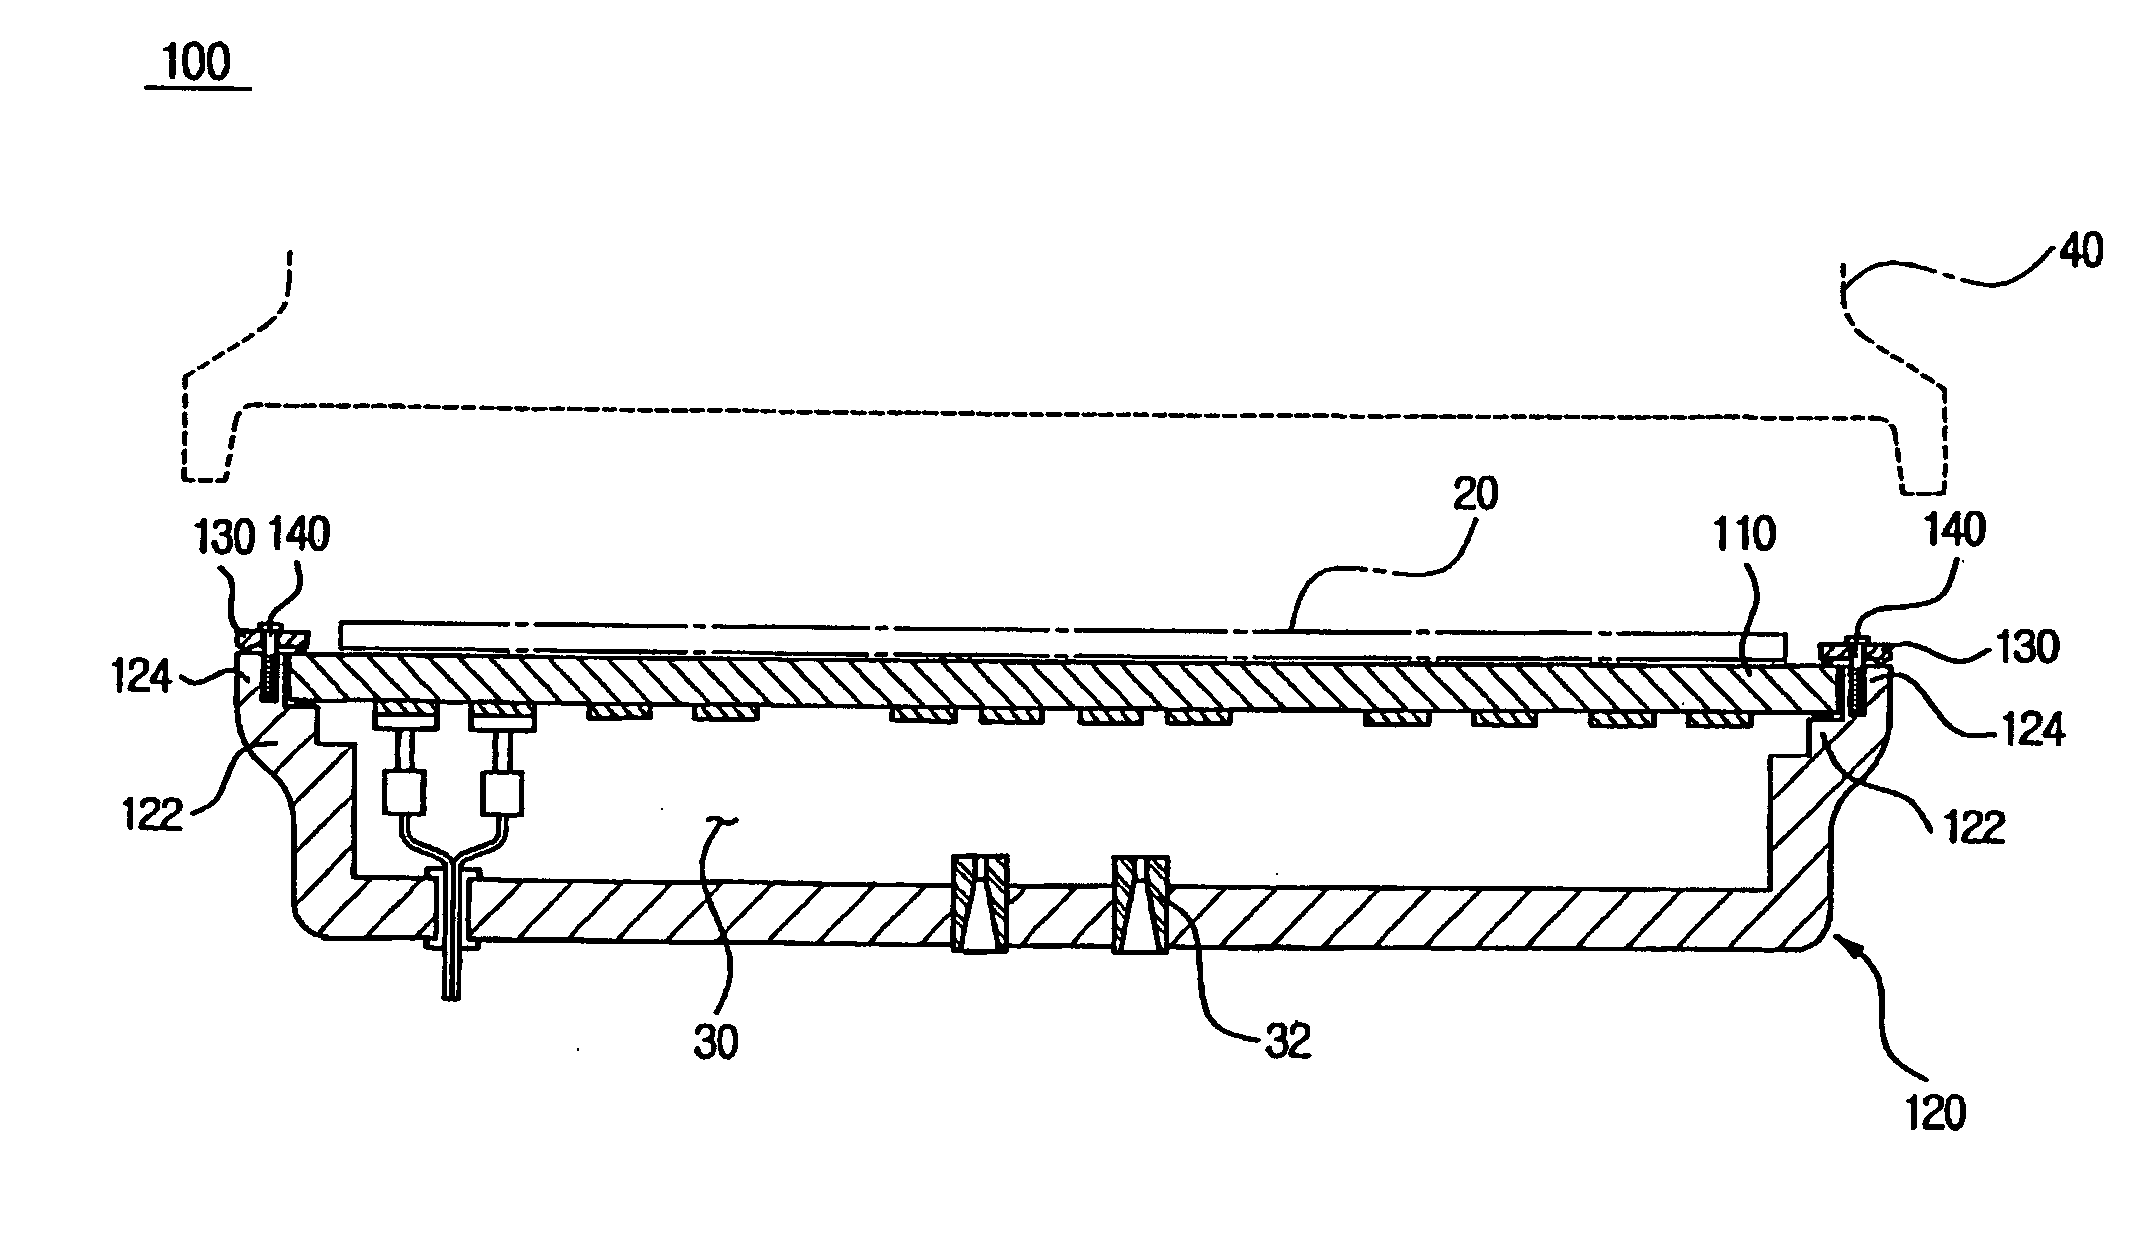 Wafer heating apparatus and method of setting the apparatus